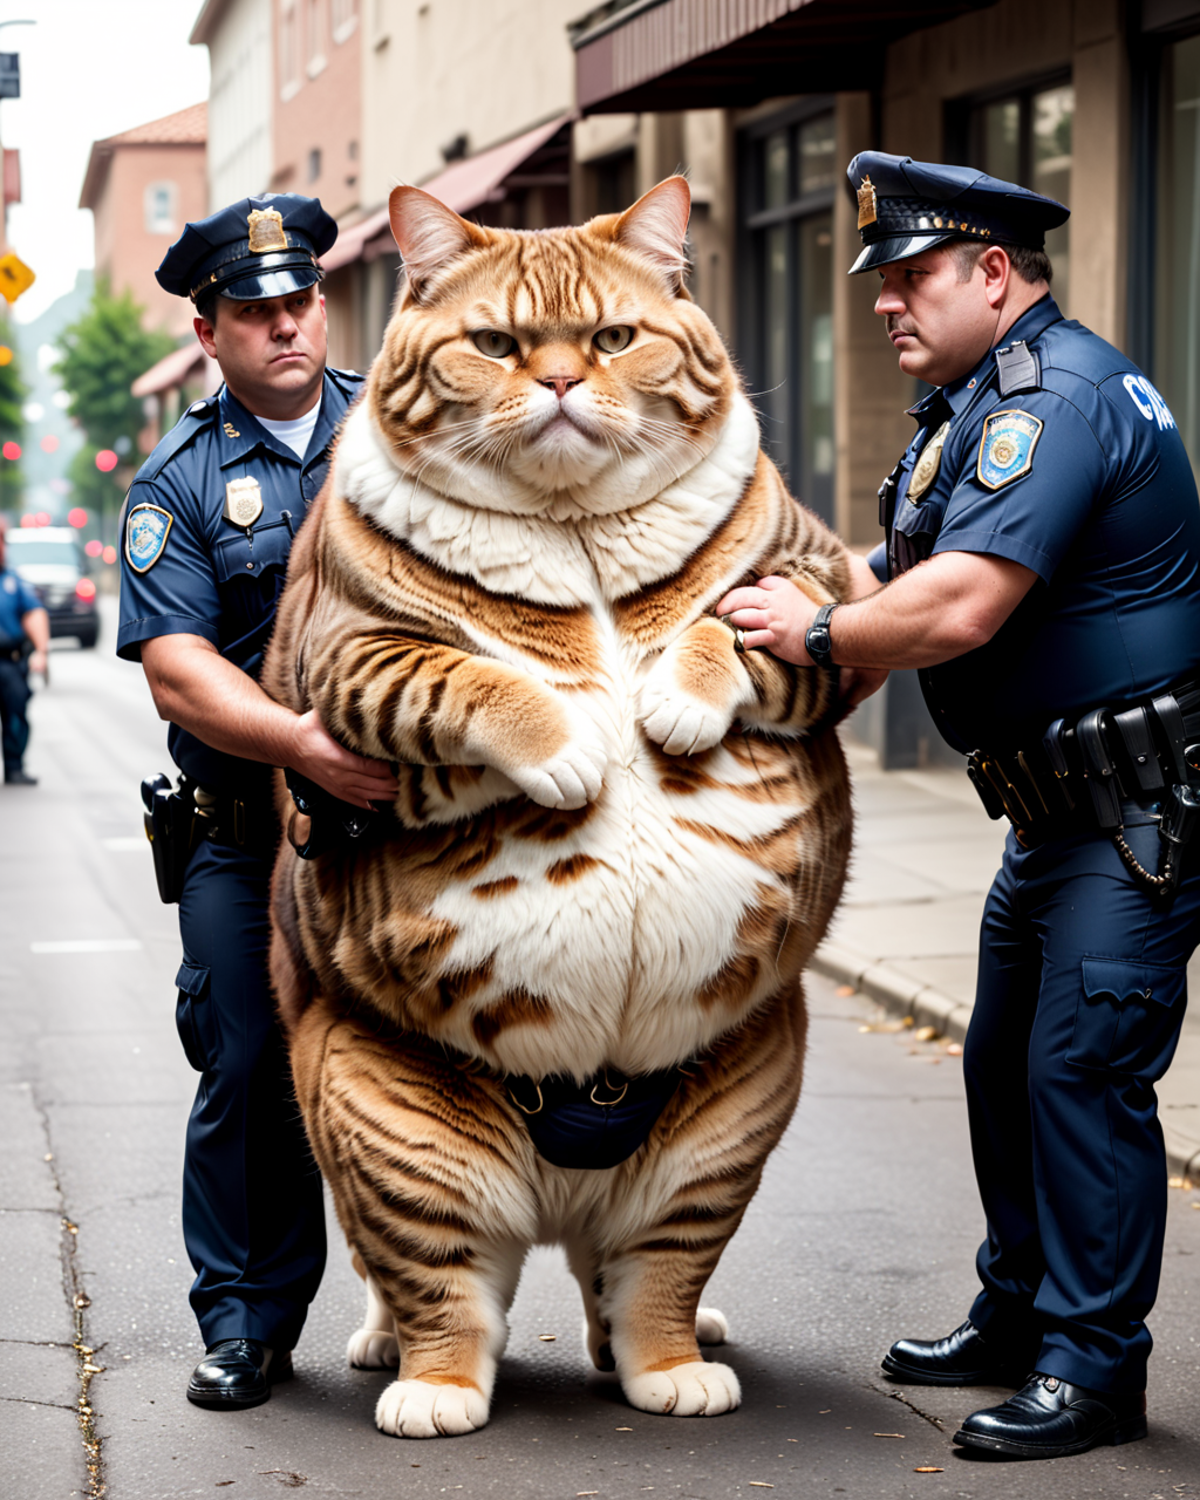 Two Police Officers Arresting a Fat Cat